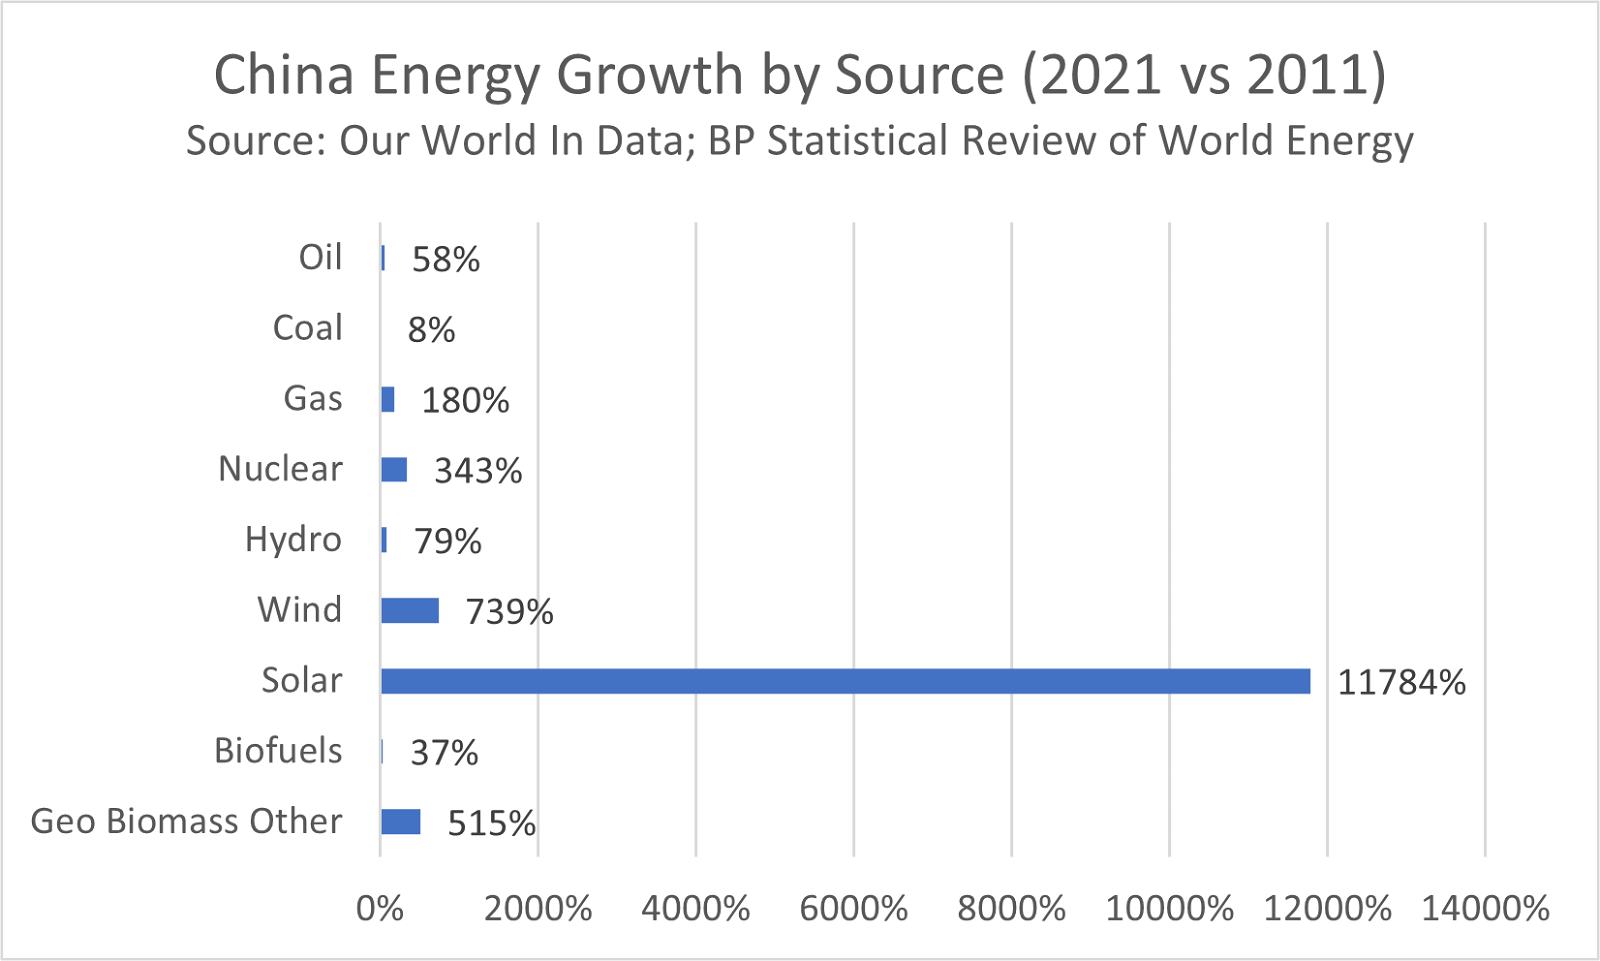 China energy growth by source 2021 vs. 2011